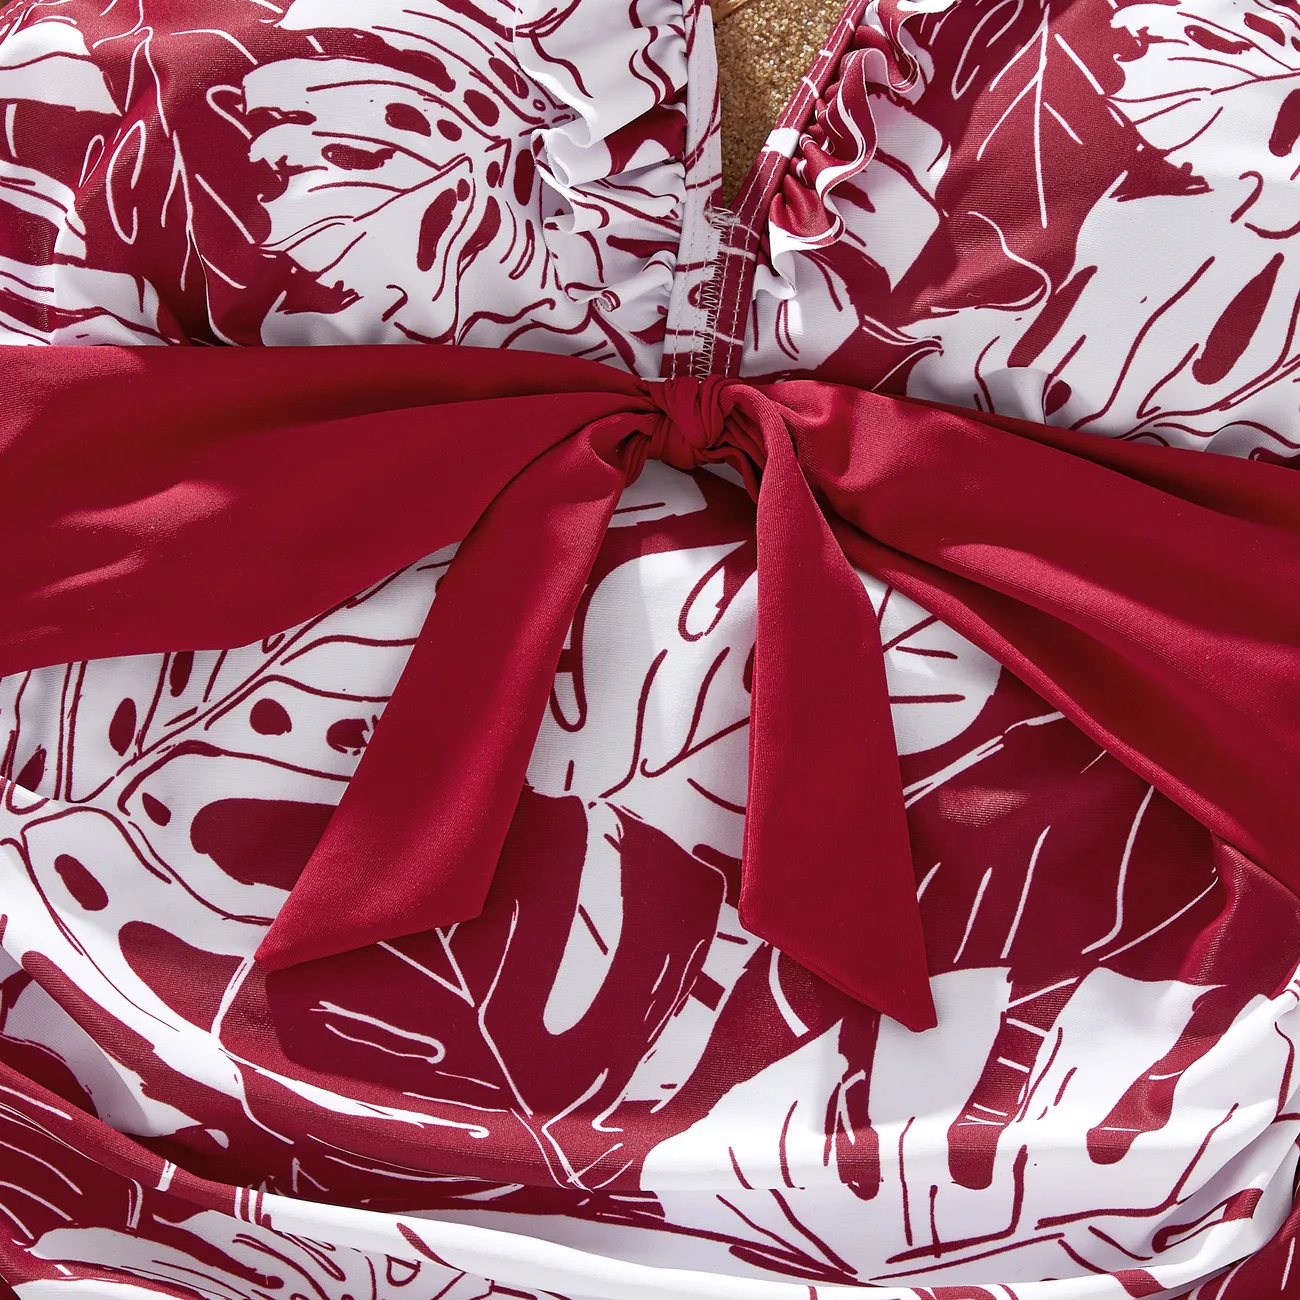 Family Matching Floral Drawstring Swim Trunks or One-Piece Belted Strap Swimsuit MAROON big image 1